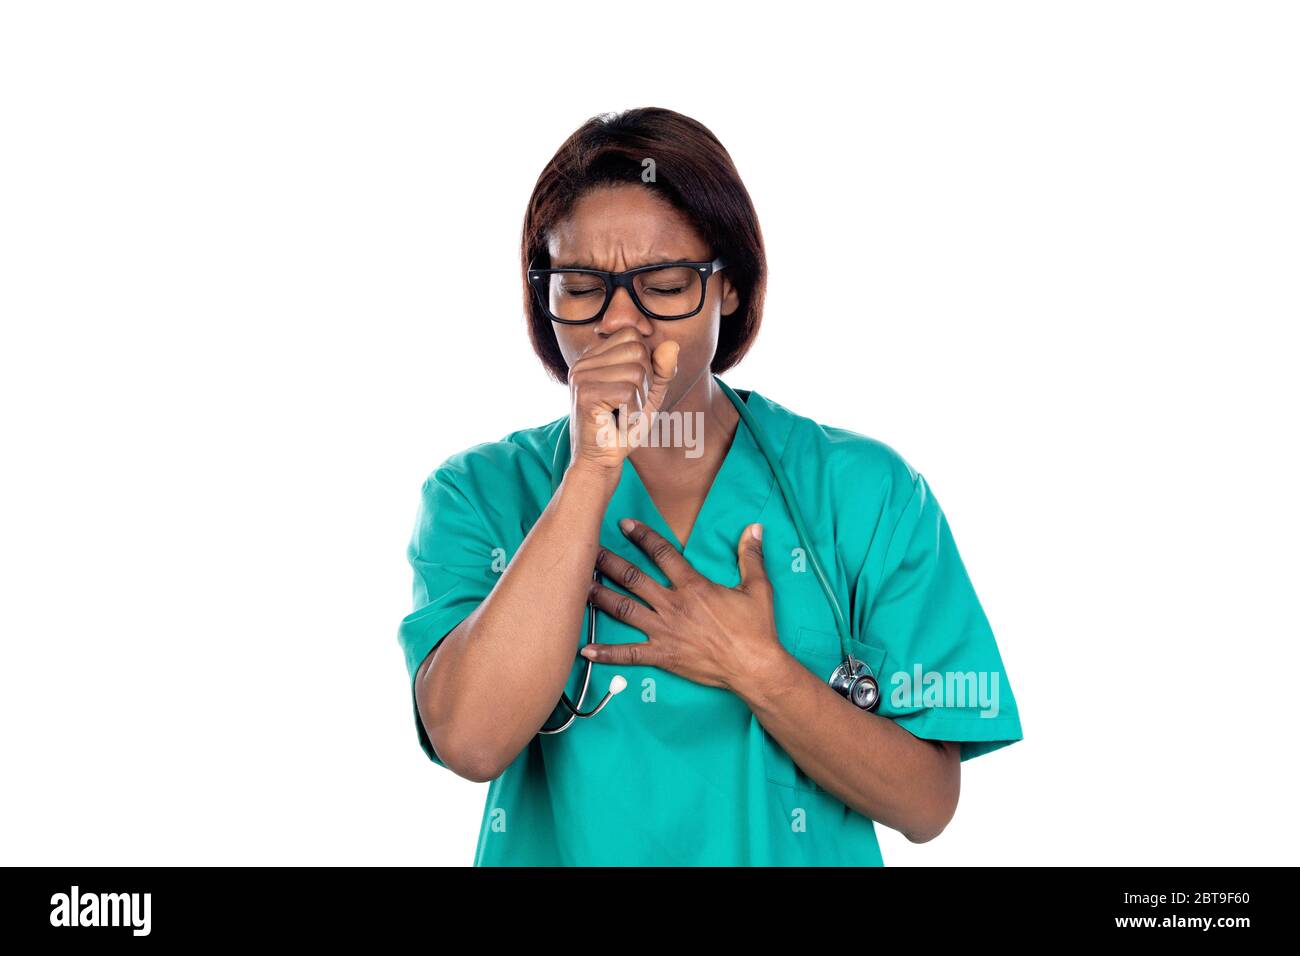 Doctor with green uniform coughing isolated on a white background Stock Photo